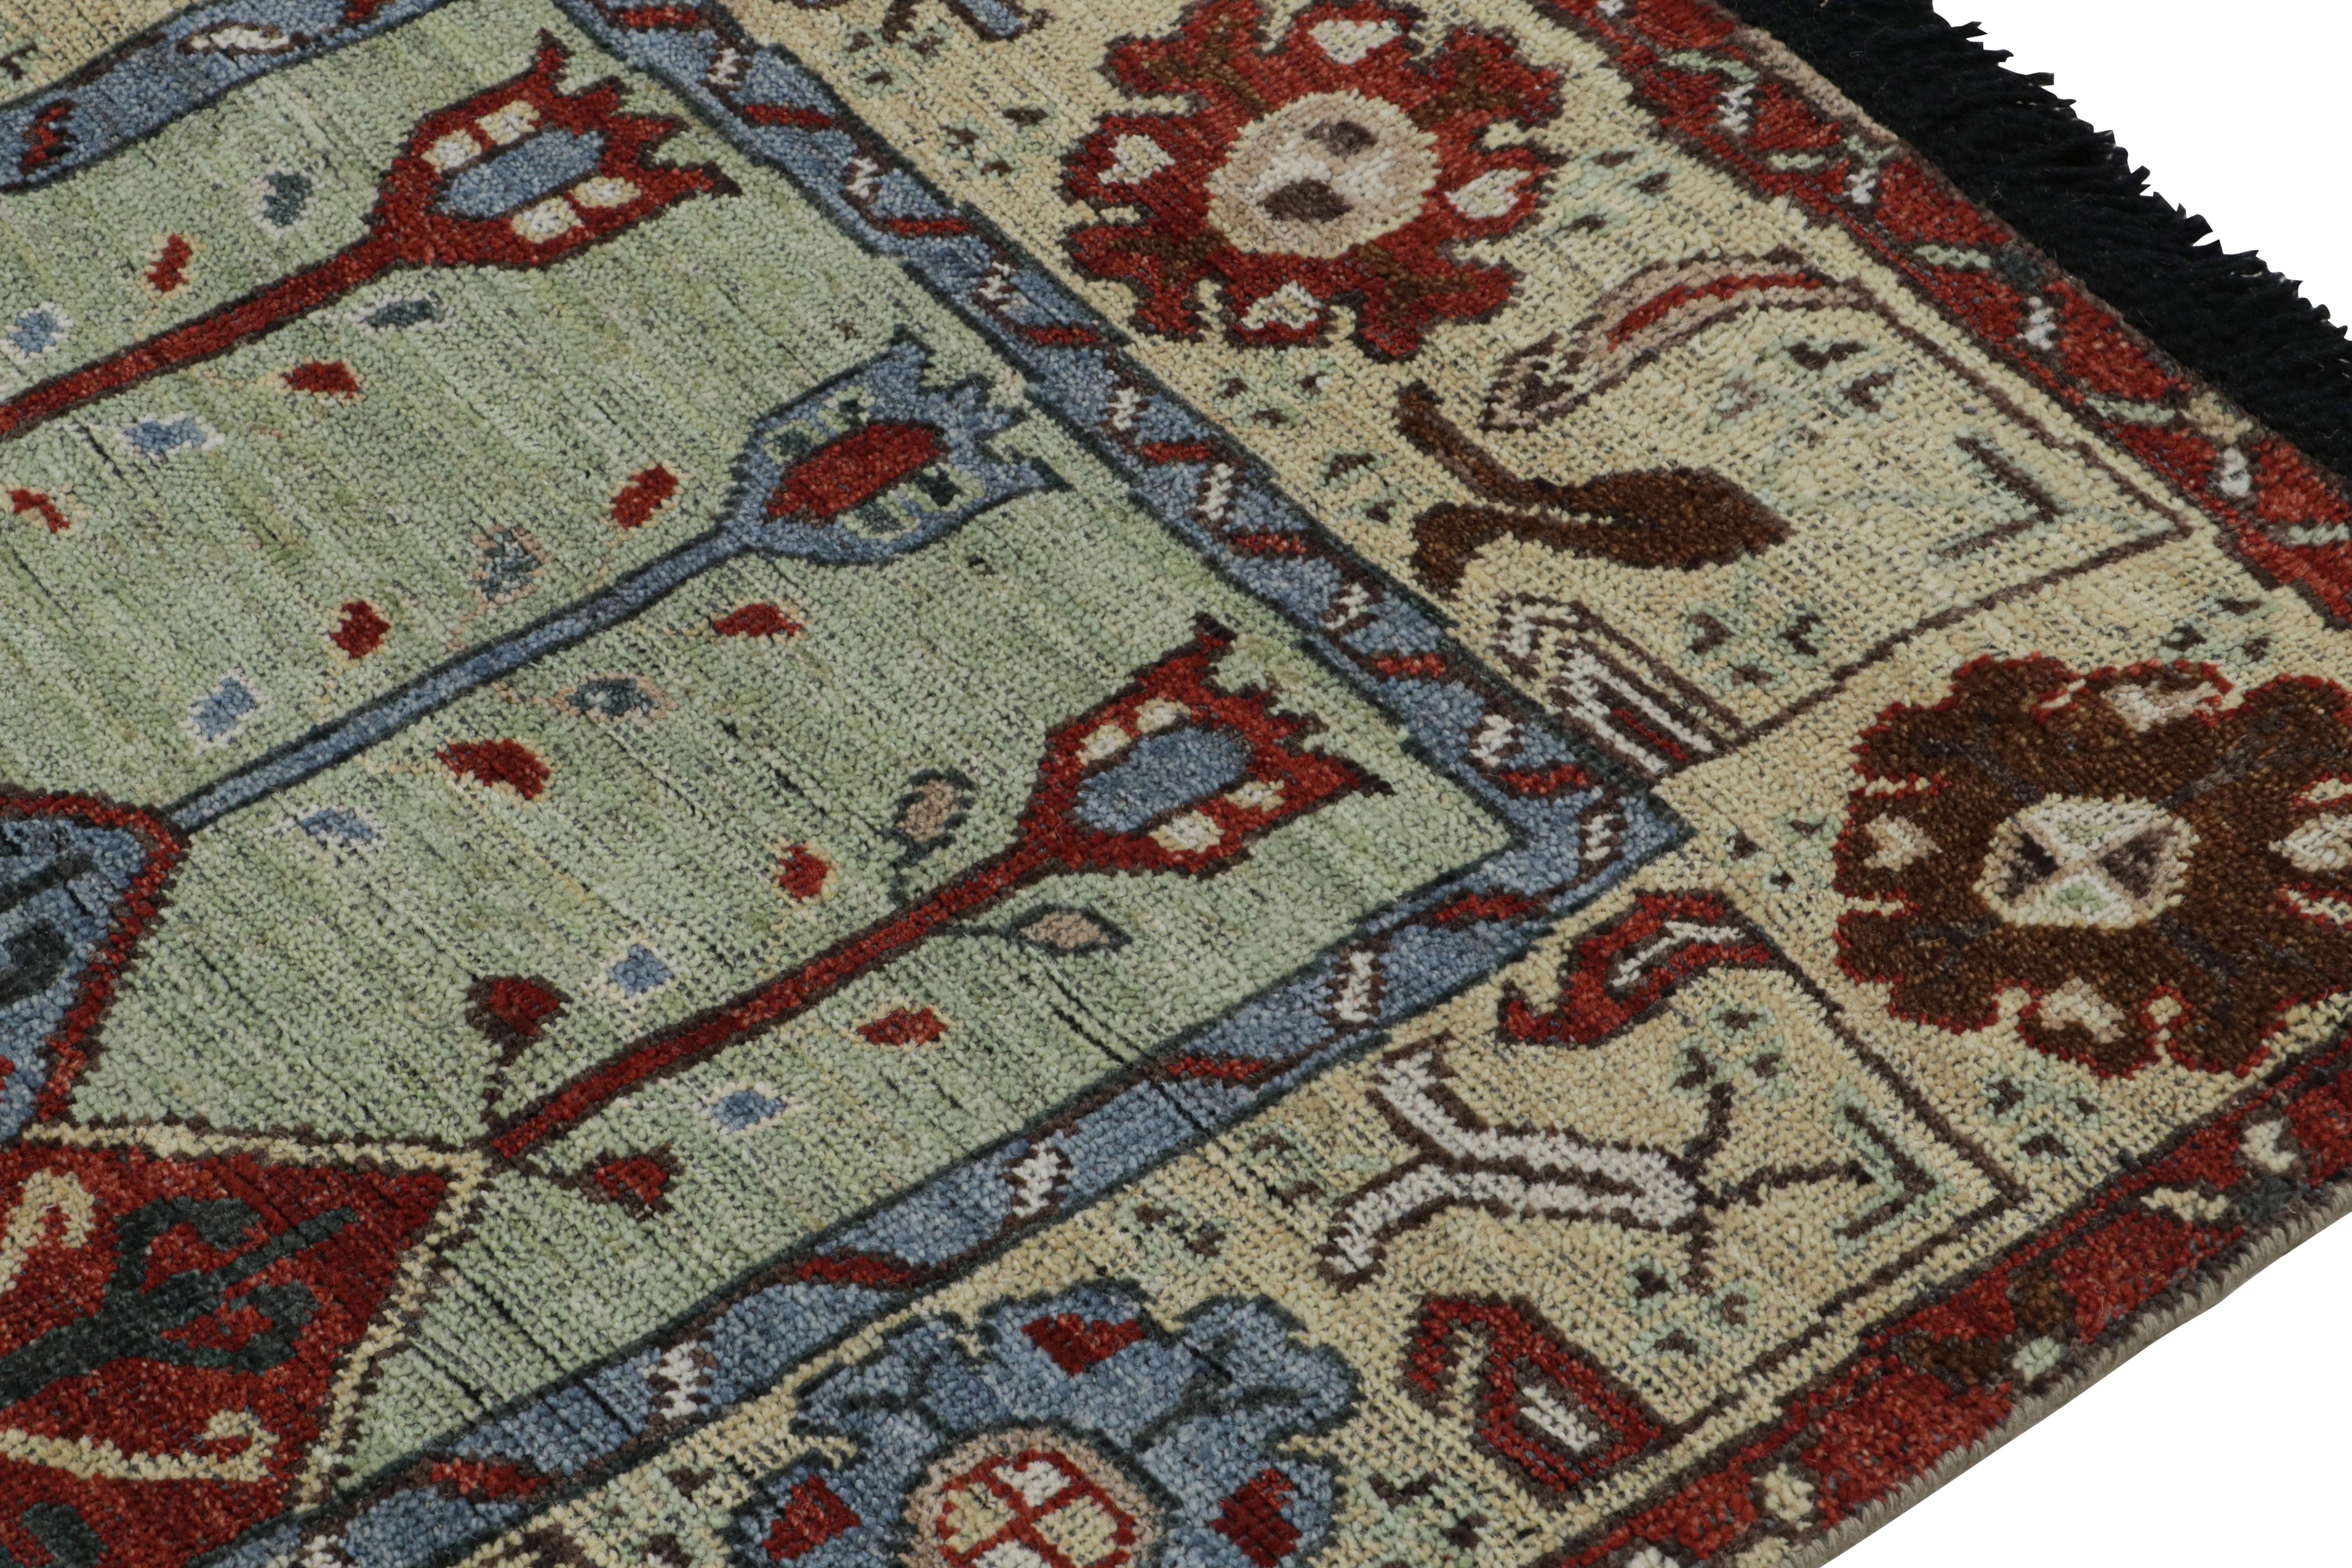 Rug & Kilim’s Tribal Style Runner Rug in Red with Mihrab and Floral Patterns In New Condition For Sale In Long Island City, NY